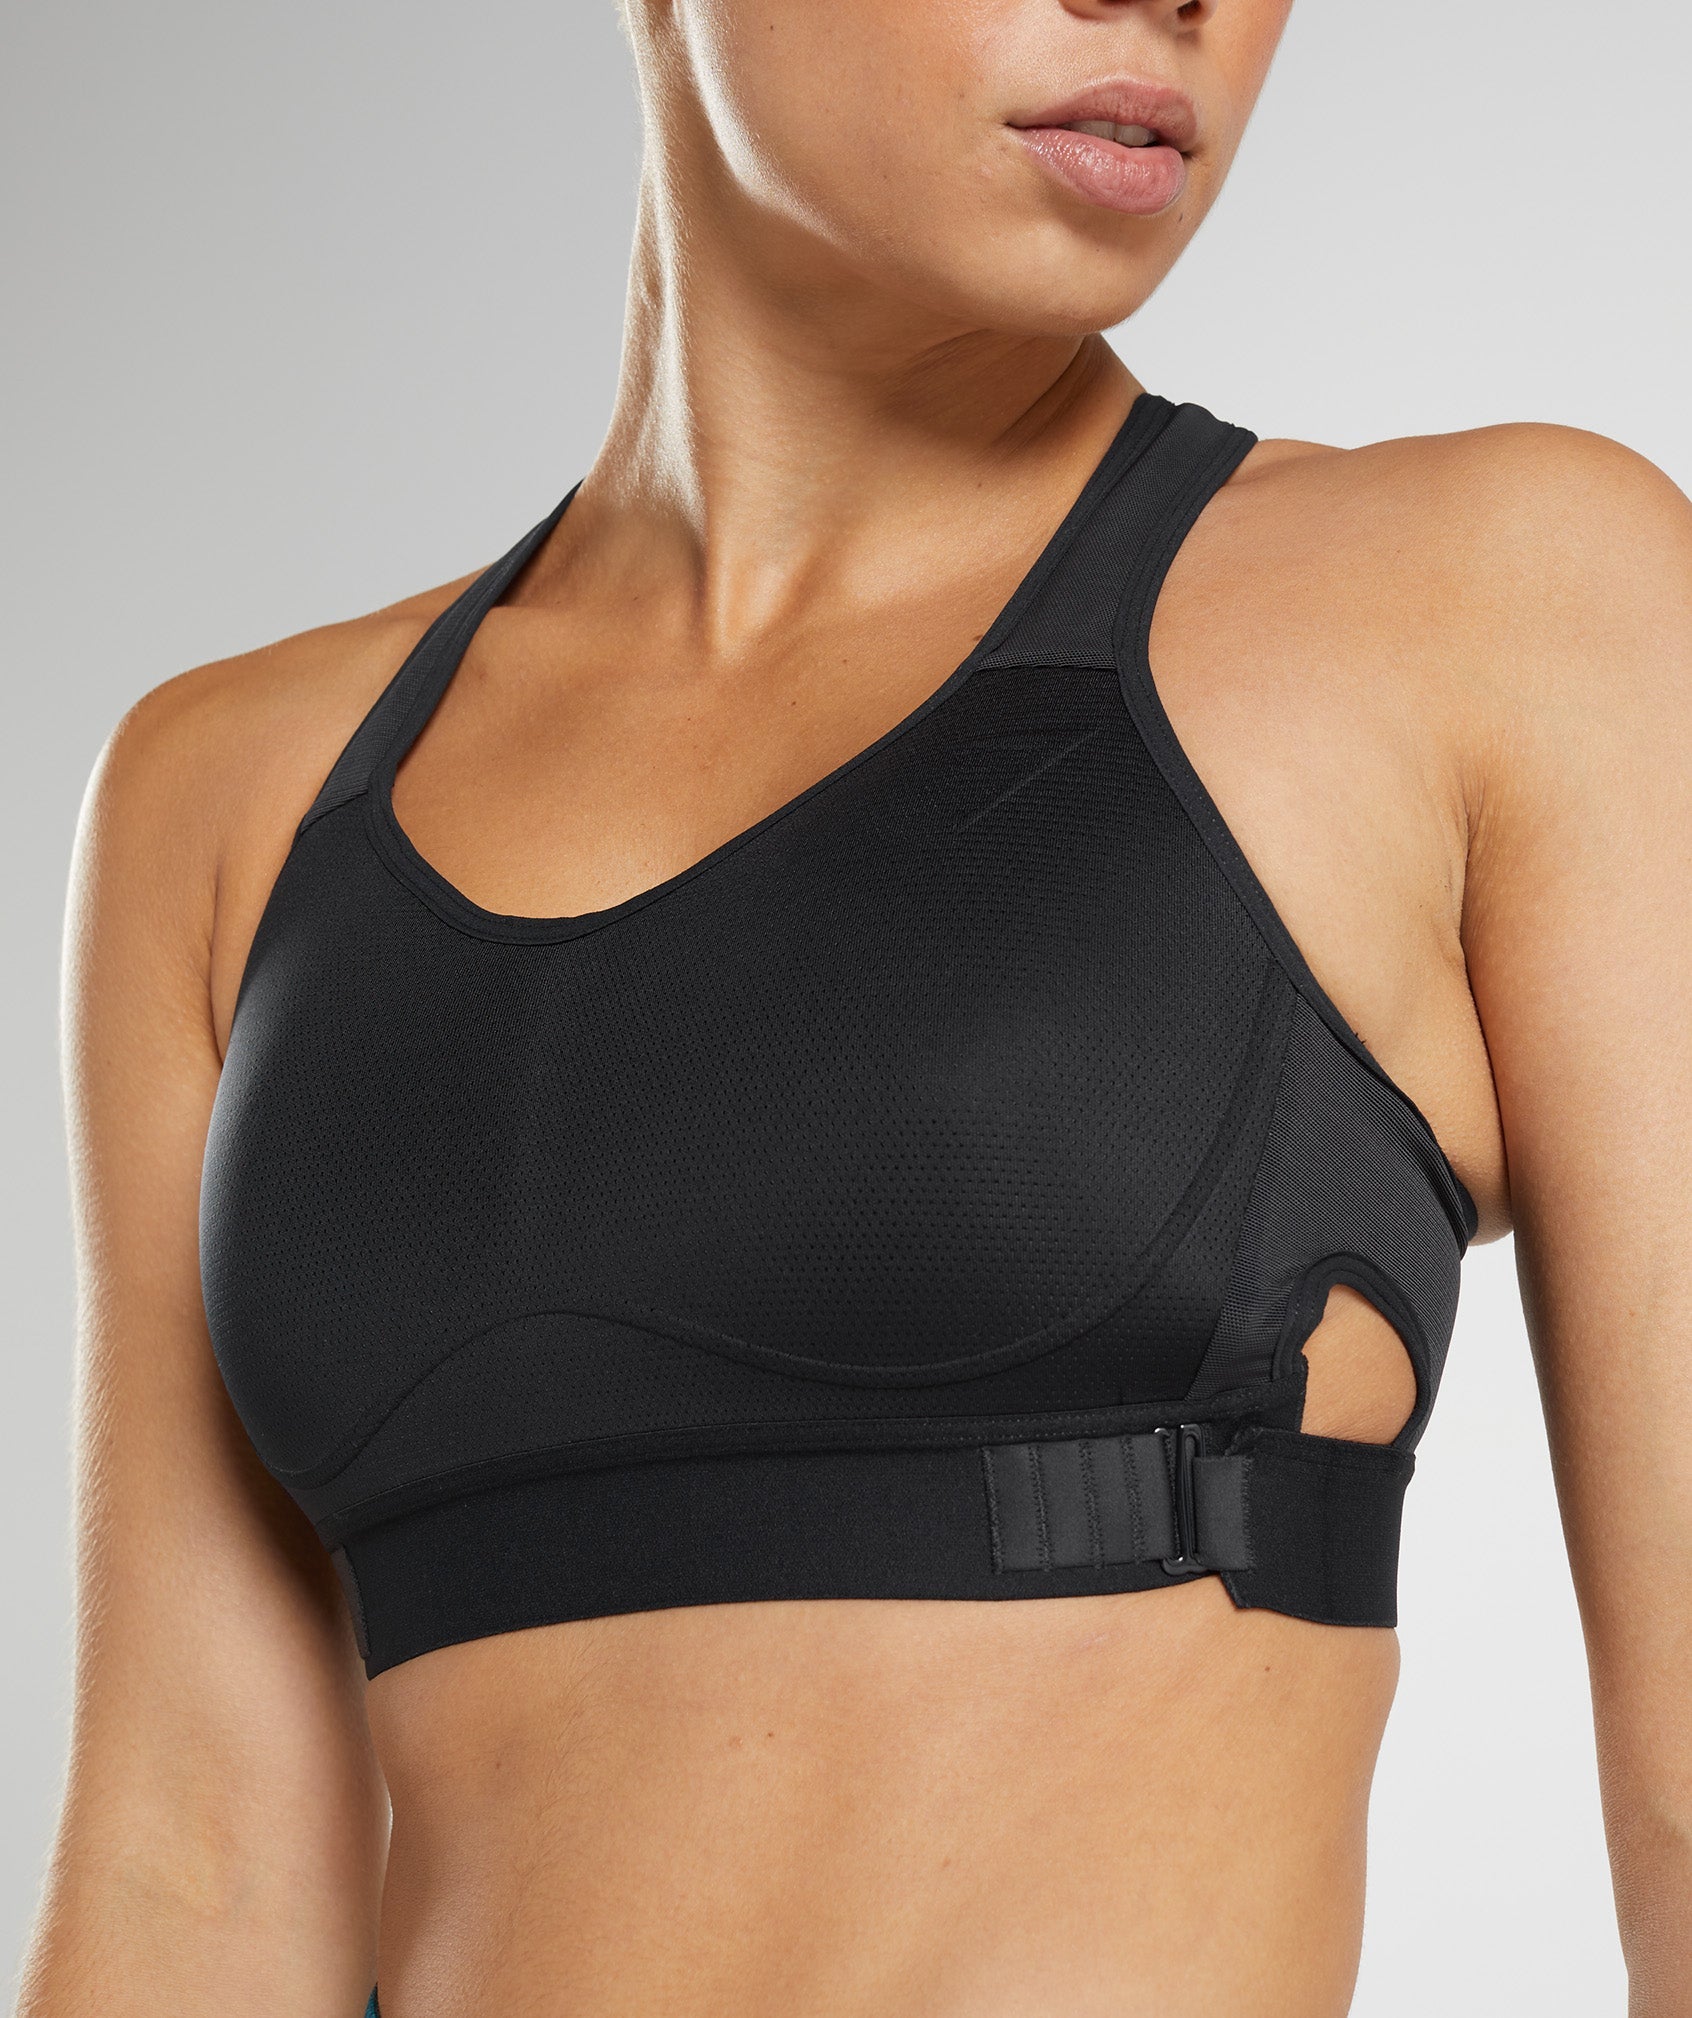 Racerback High Support Sports Bra in Black - view 3